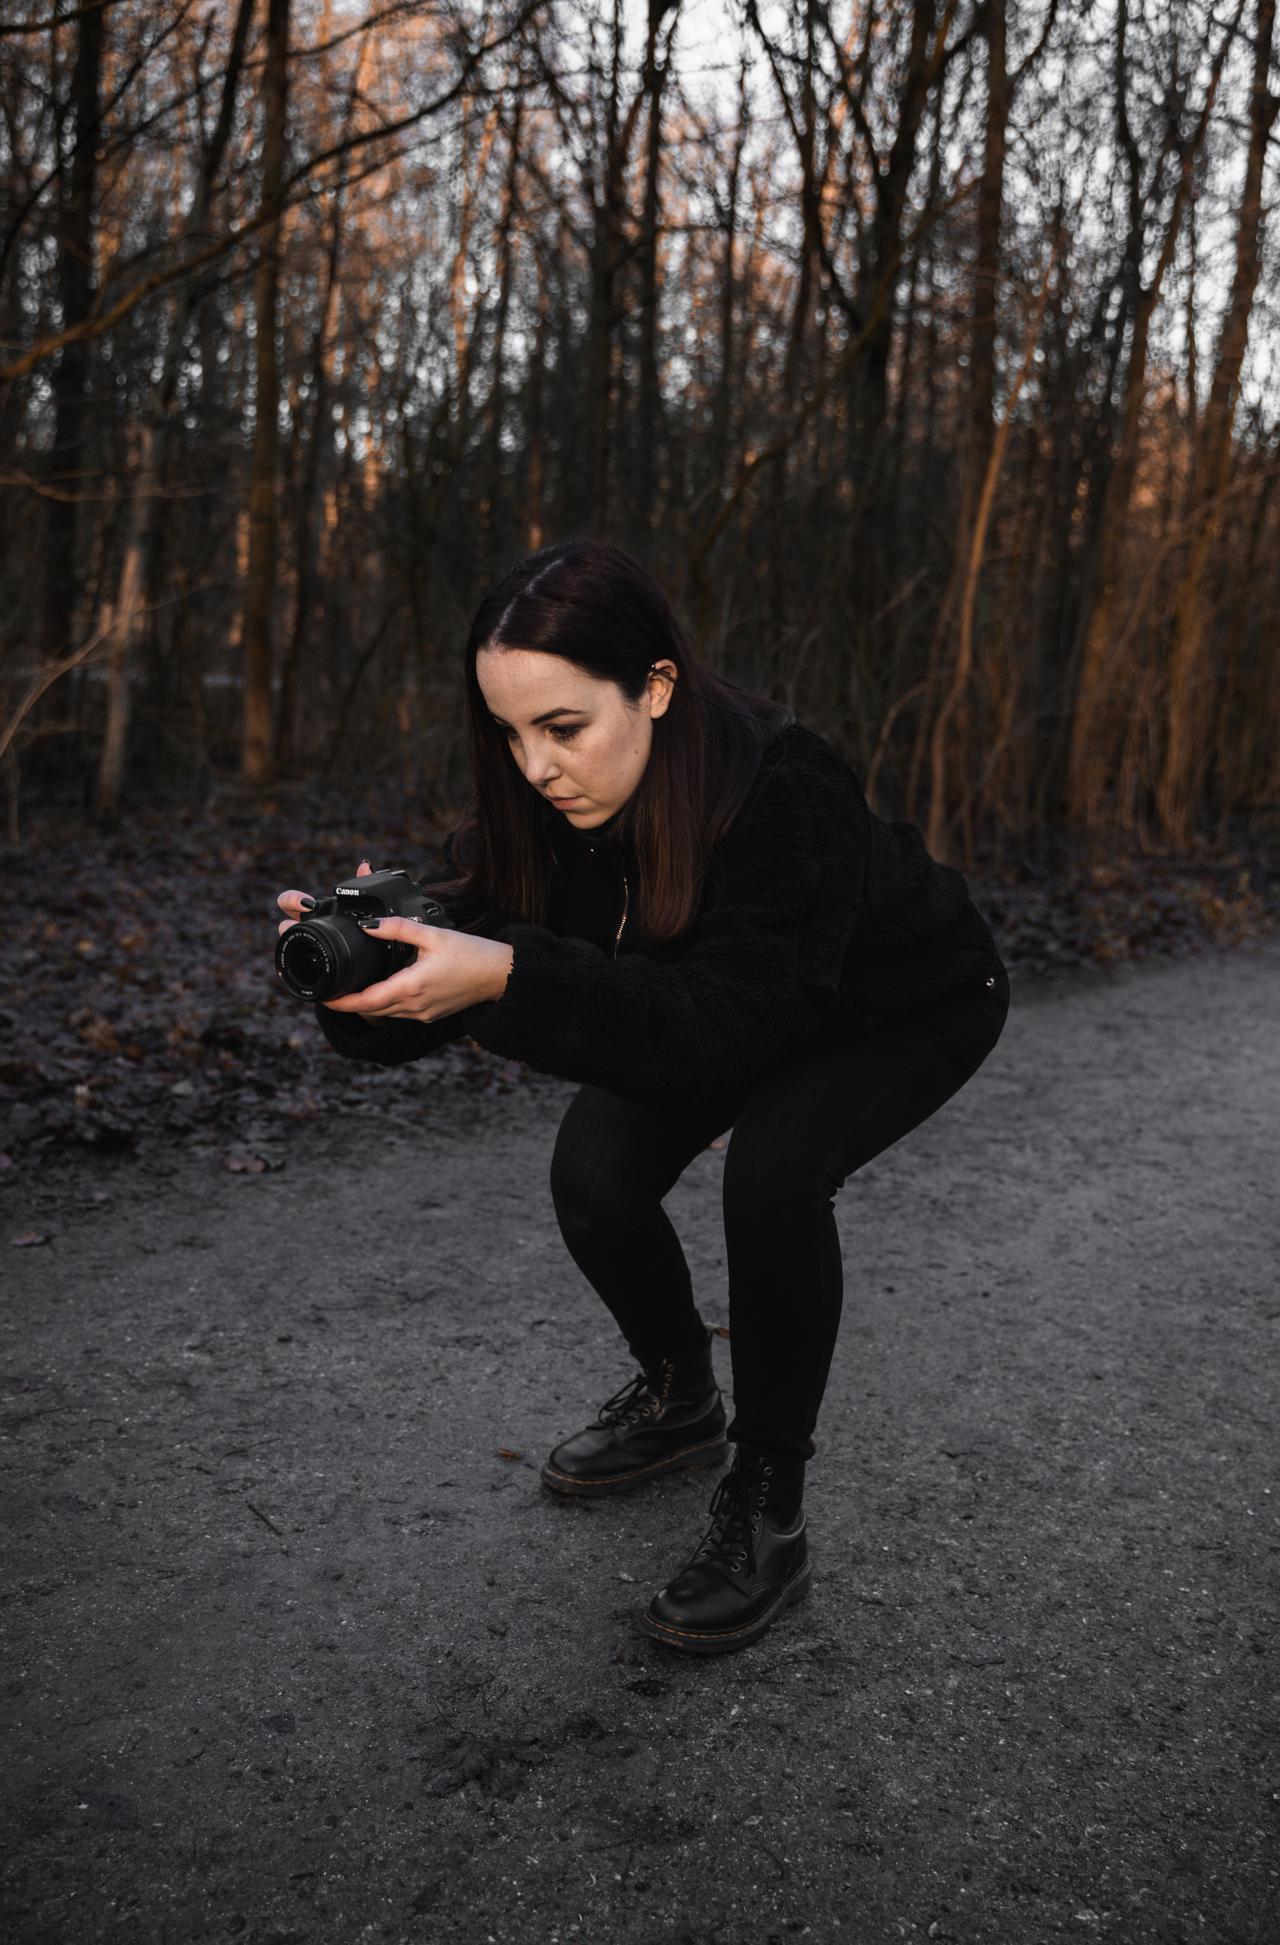 Lila crouching on a wooded path holding a camera